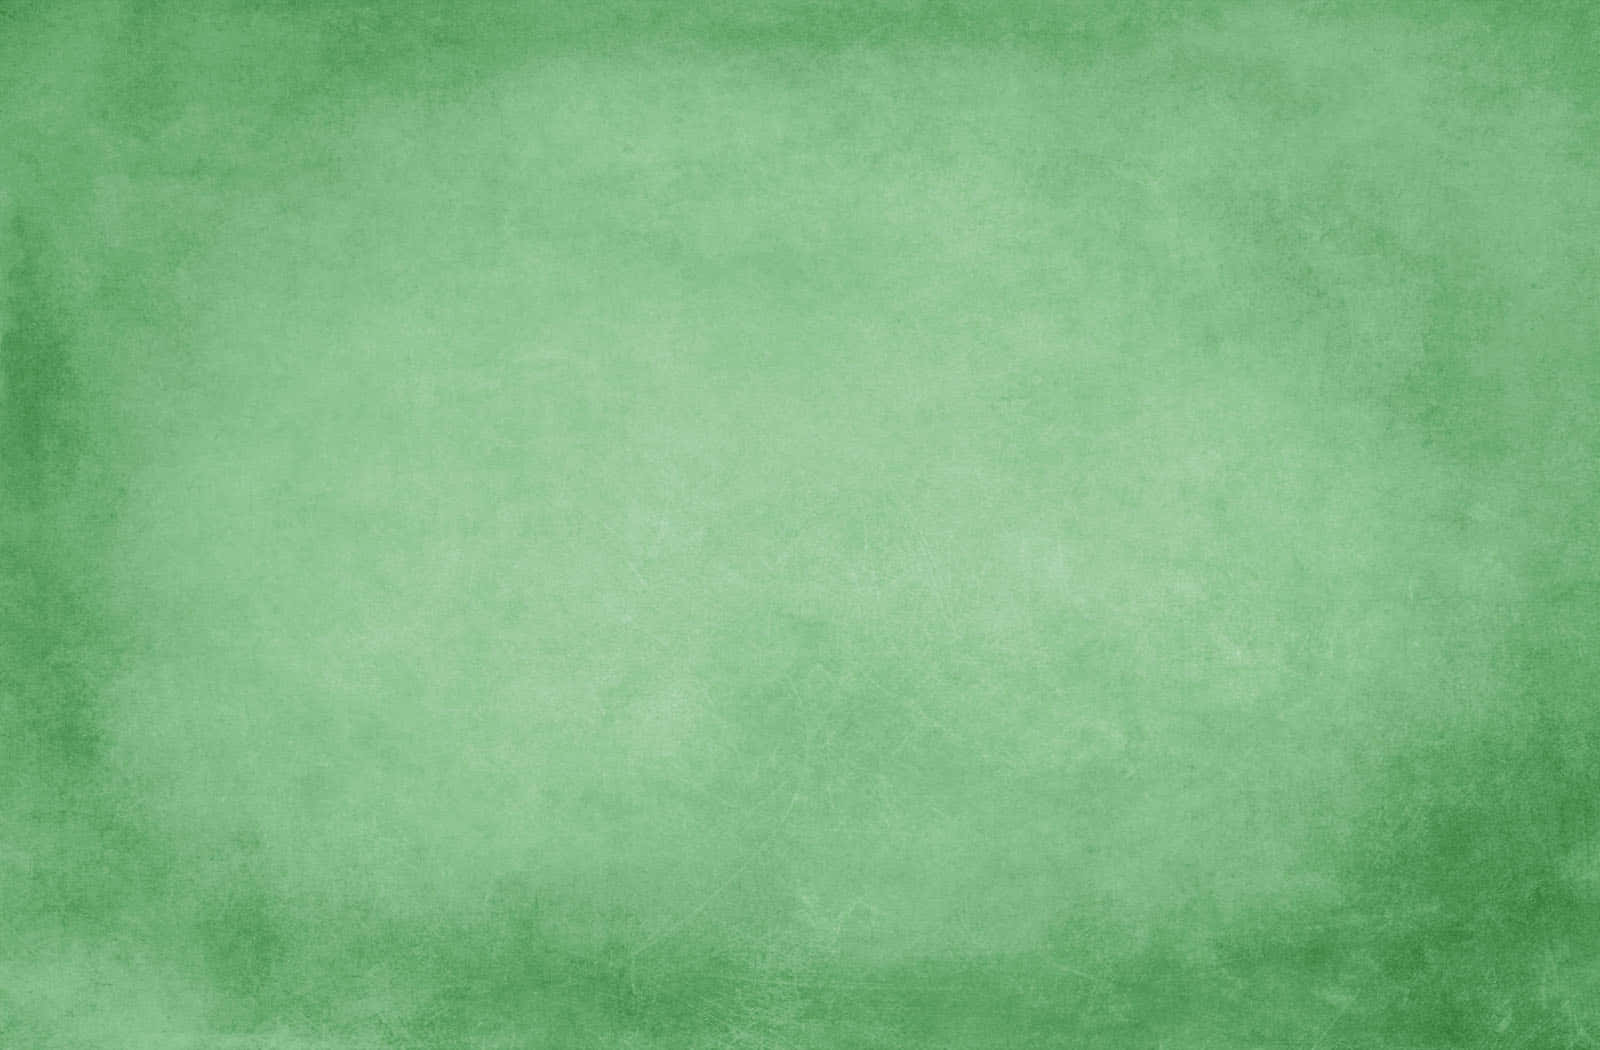 A vibrant solid green background